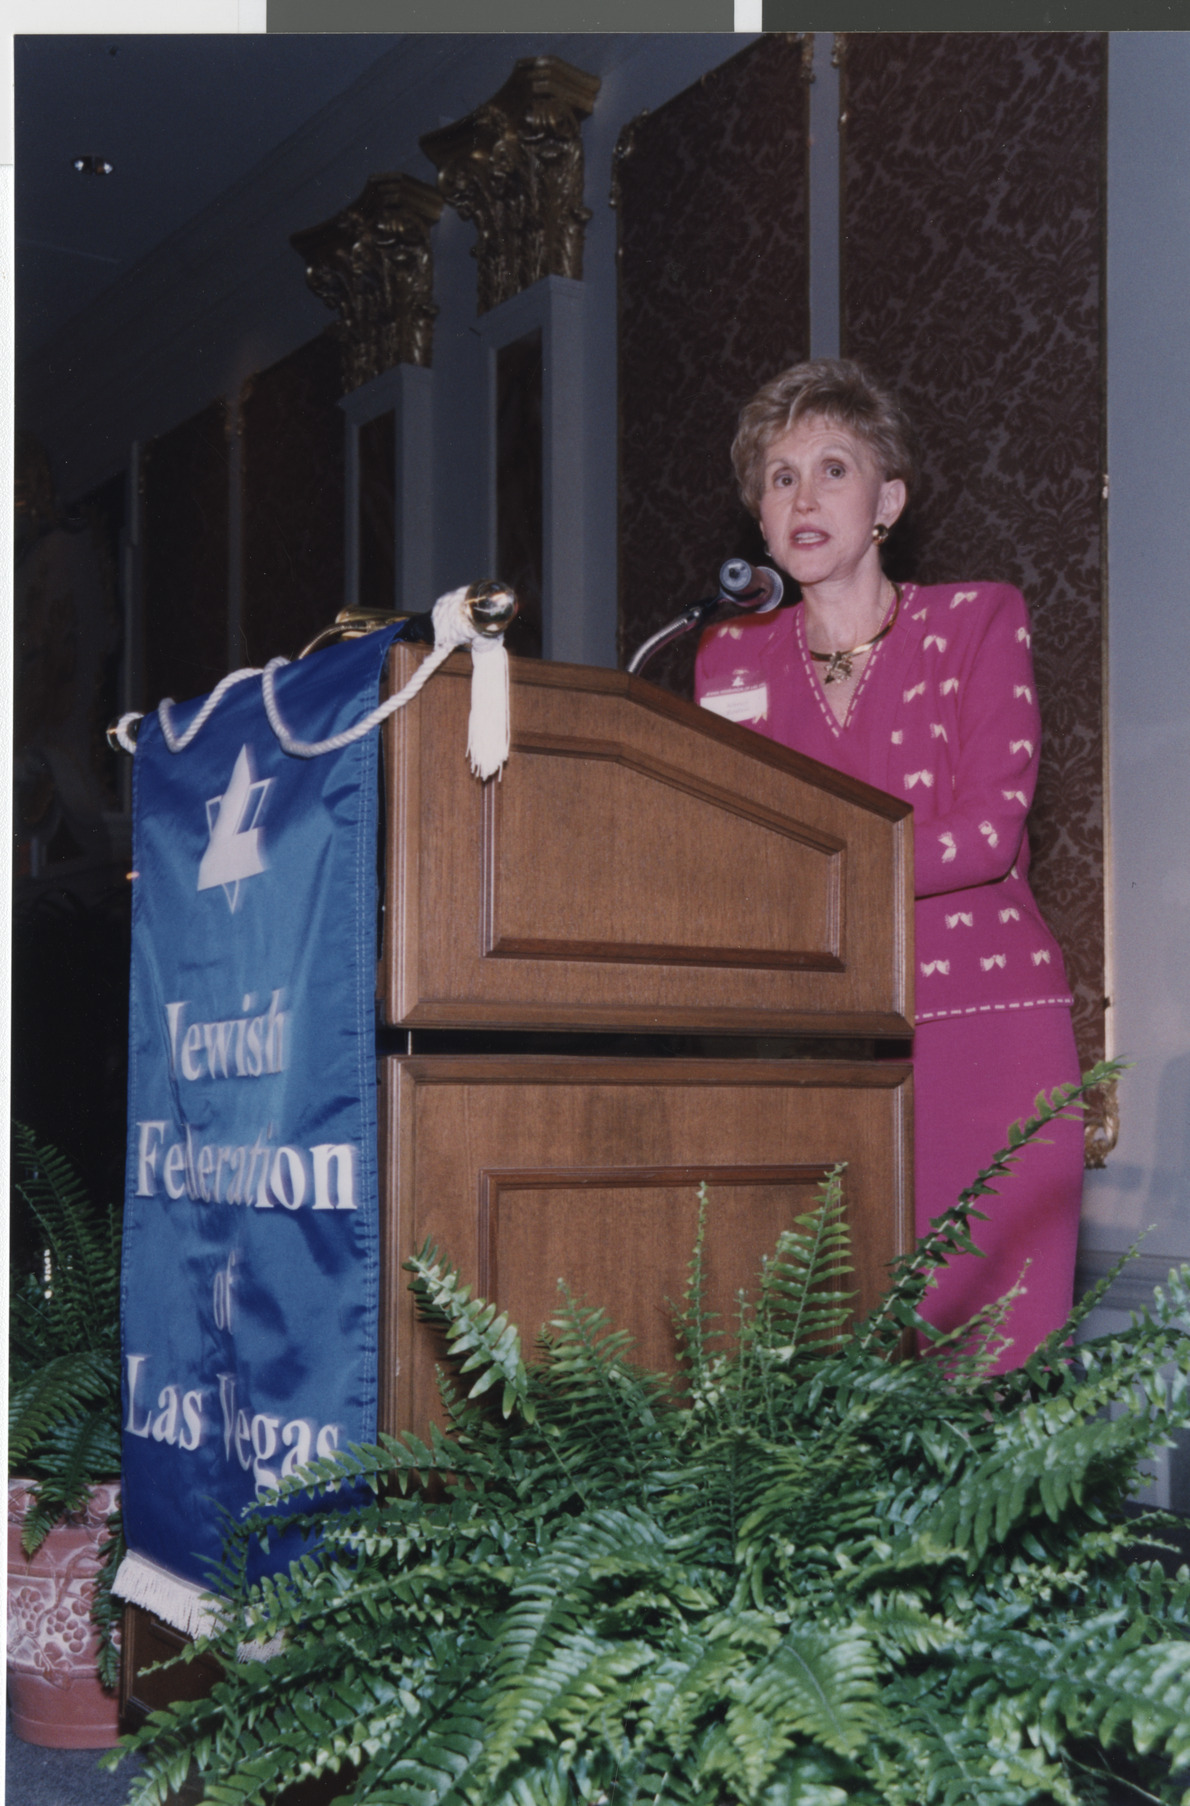 Photograph of Jewish Federation of Las Vegas Main Event Luncheon Event, 2000